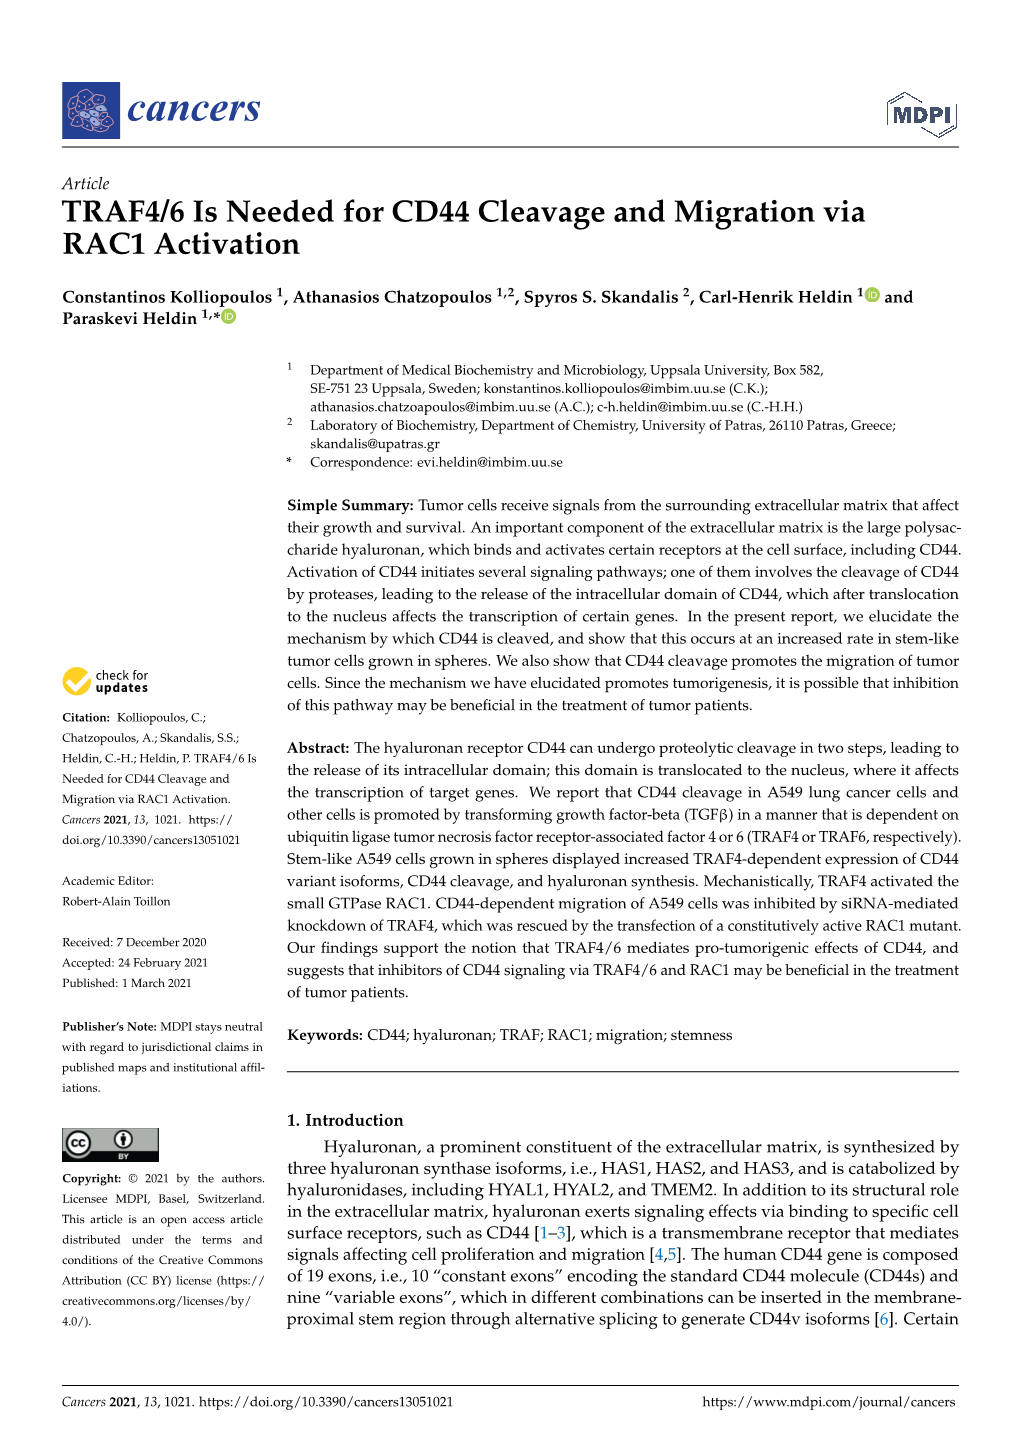 TRAF4/6 Is Needed for CD44 Cleavage and Migration Via RAC1 Activation